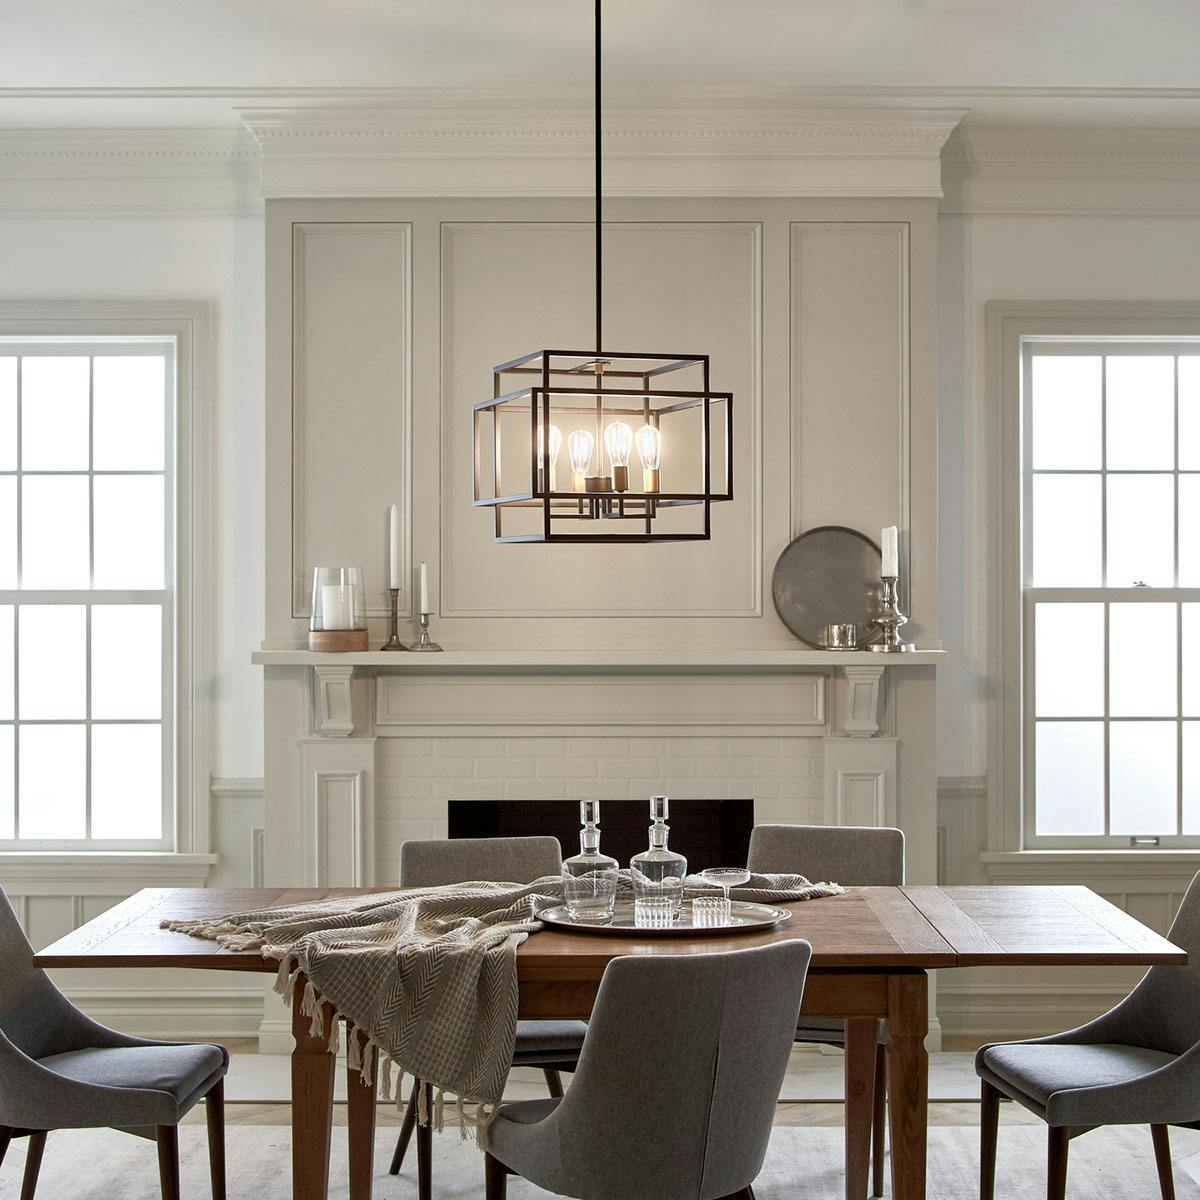 Day time dining room image featuring Taubert pendant 43984BK